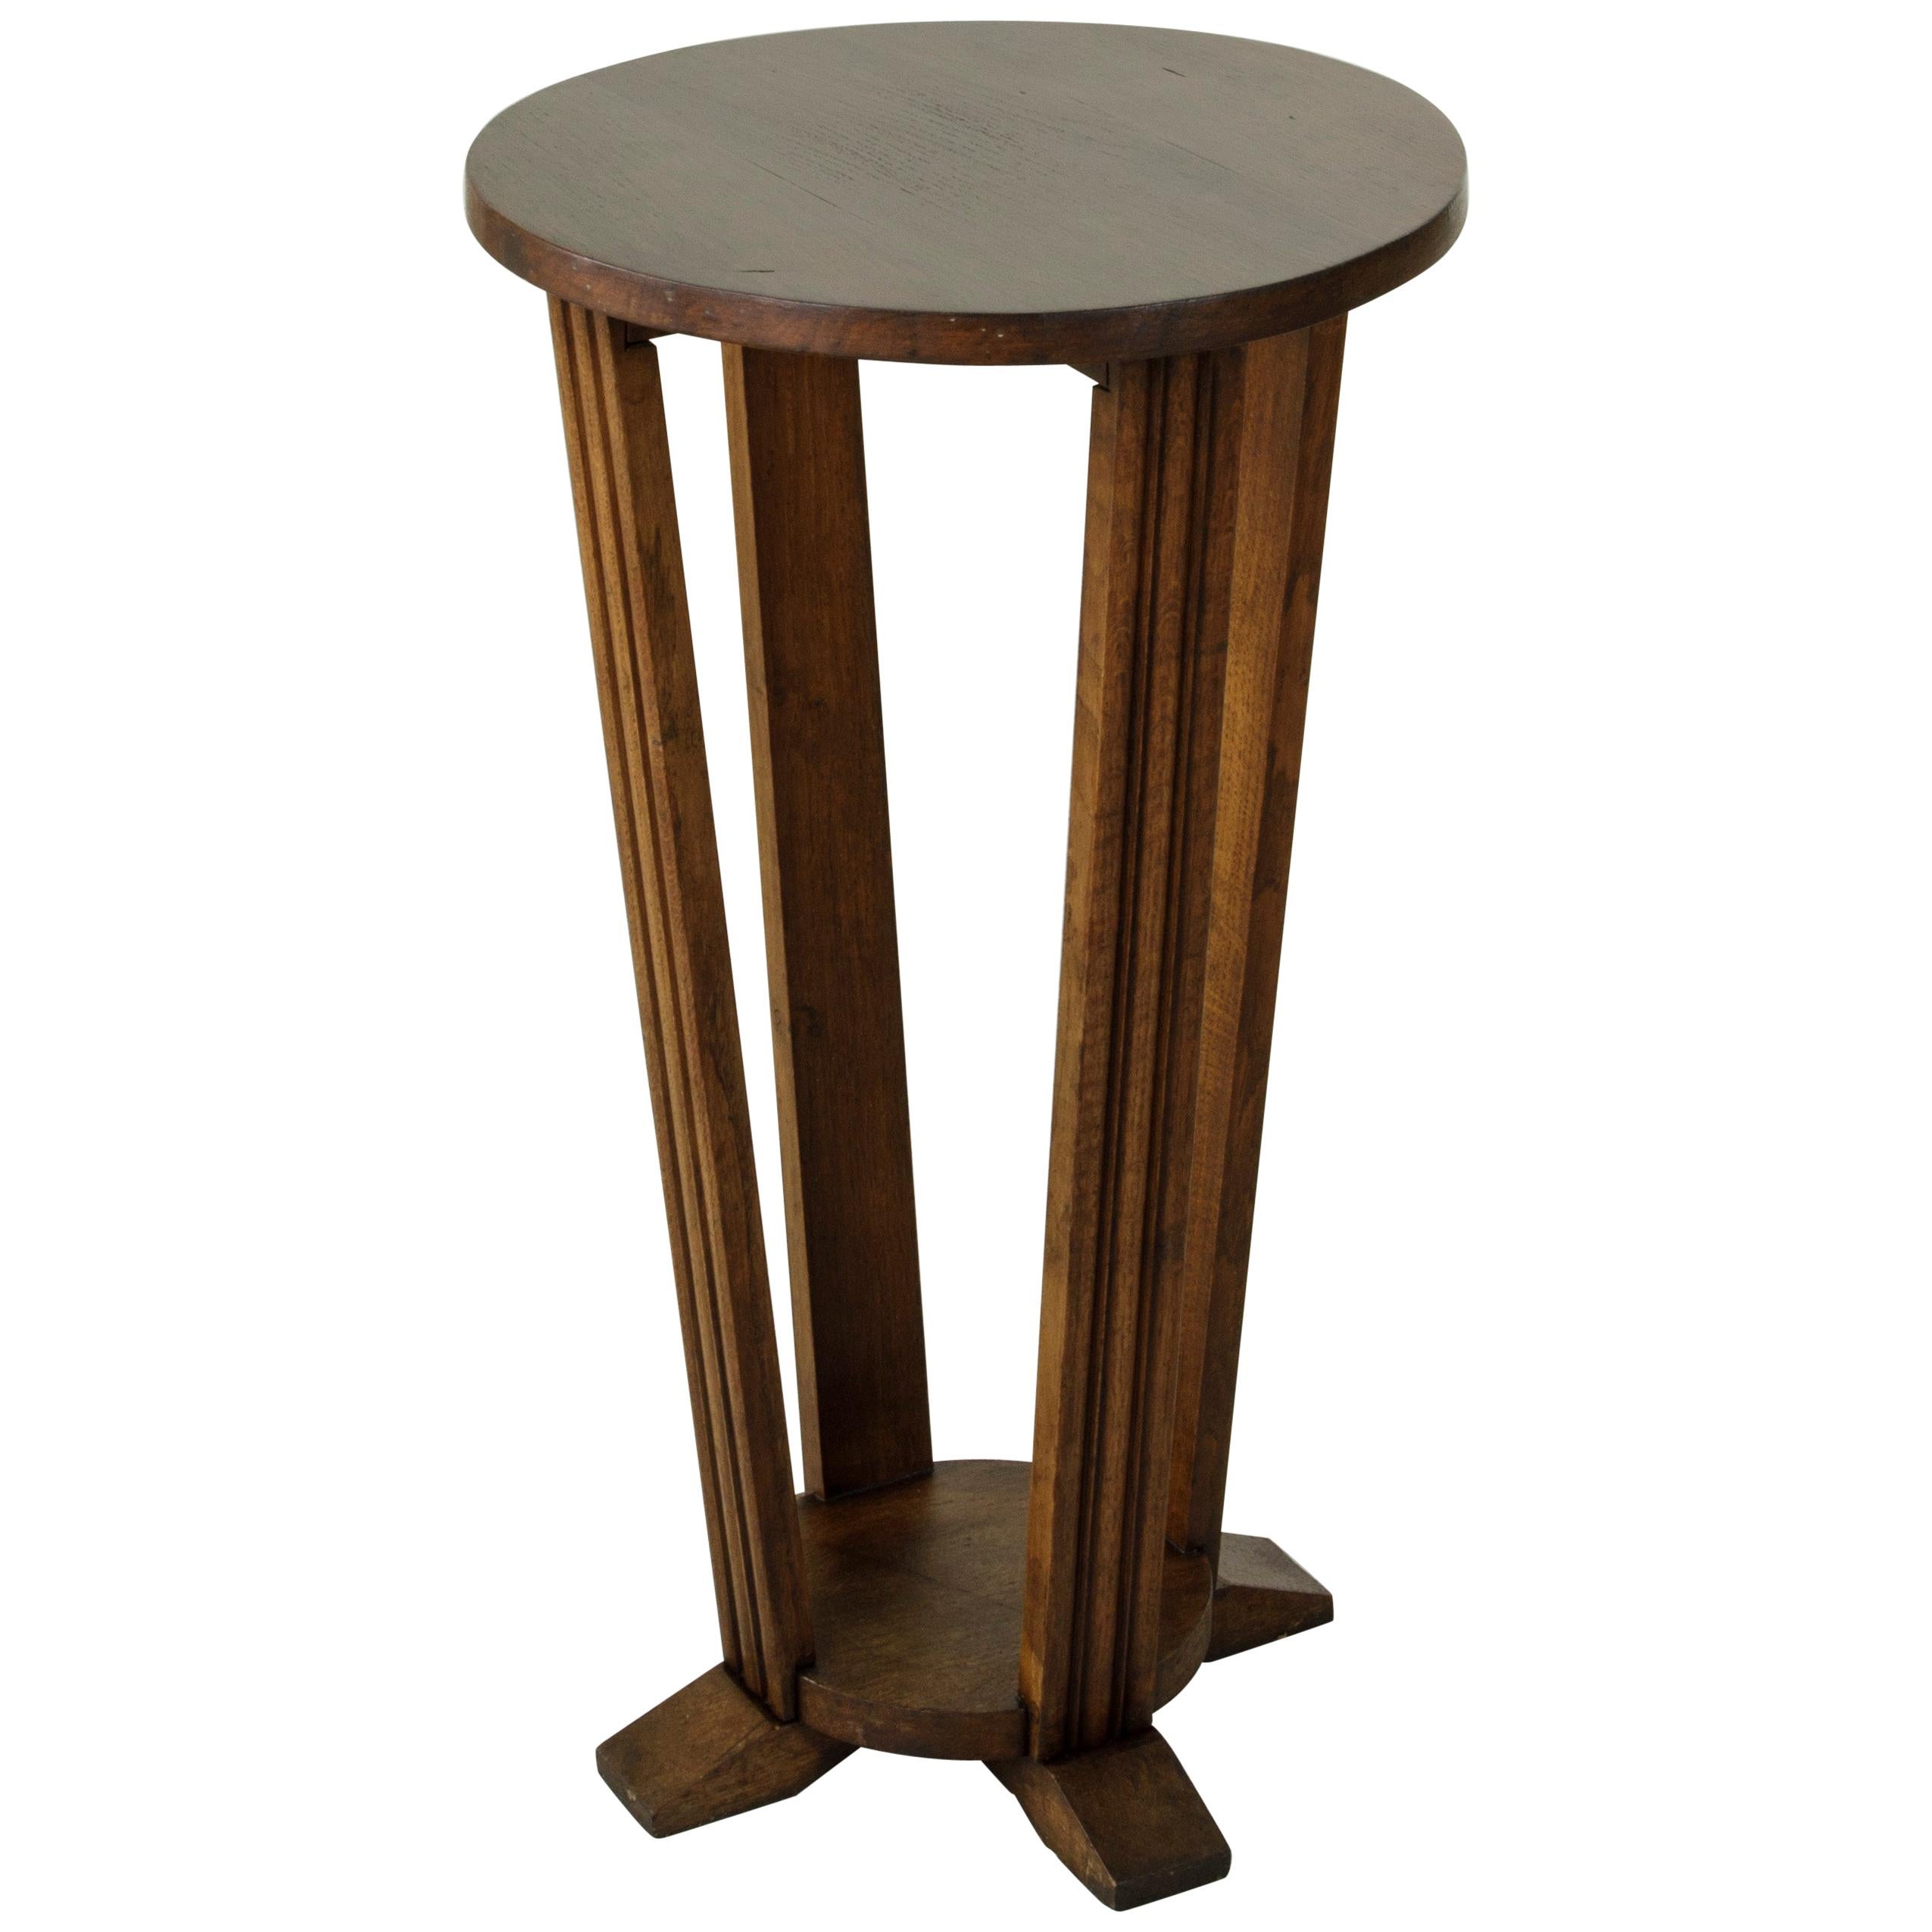 Early 20th Century French Art Deco Period Oak Pedestal, Side Table, Fern Stand